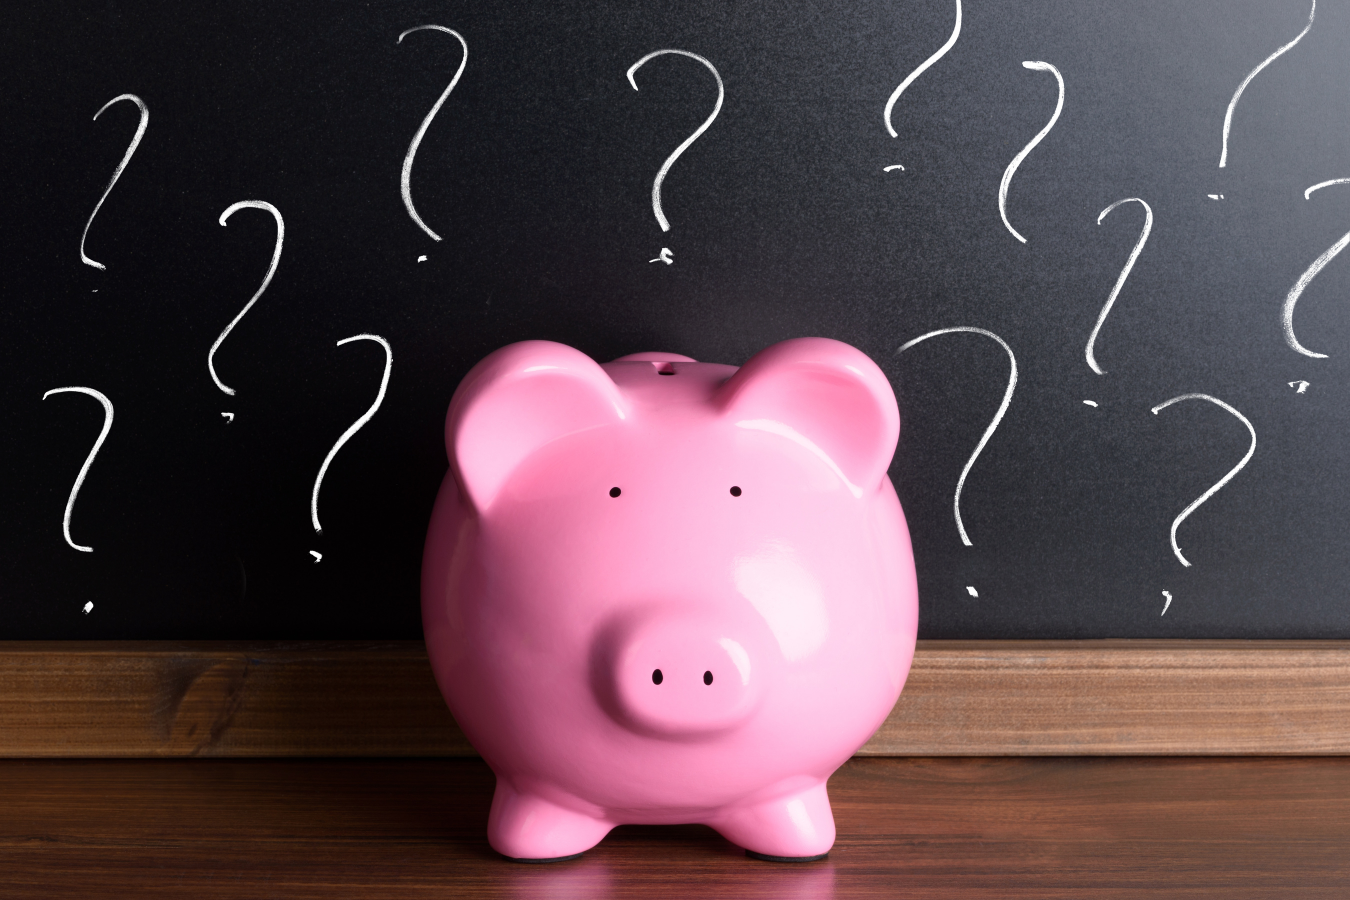 Piggy bank surrounded by question marks: when the economy is uncertain, using flex talent can help.